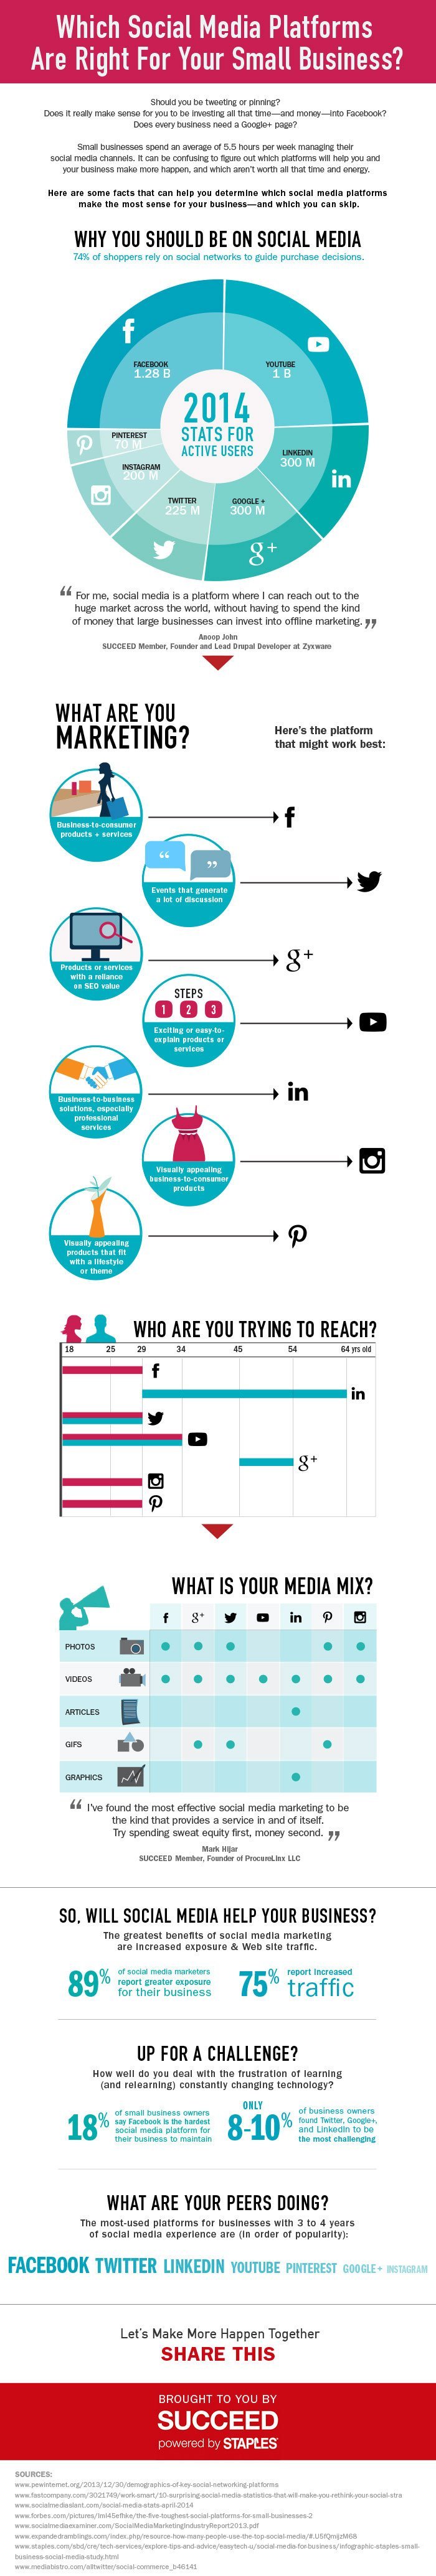 Infographic: Which Social Media Sites Should You Use To Market Your Business?